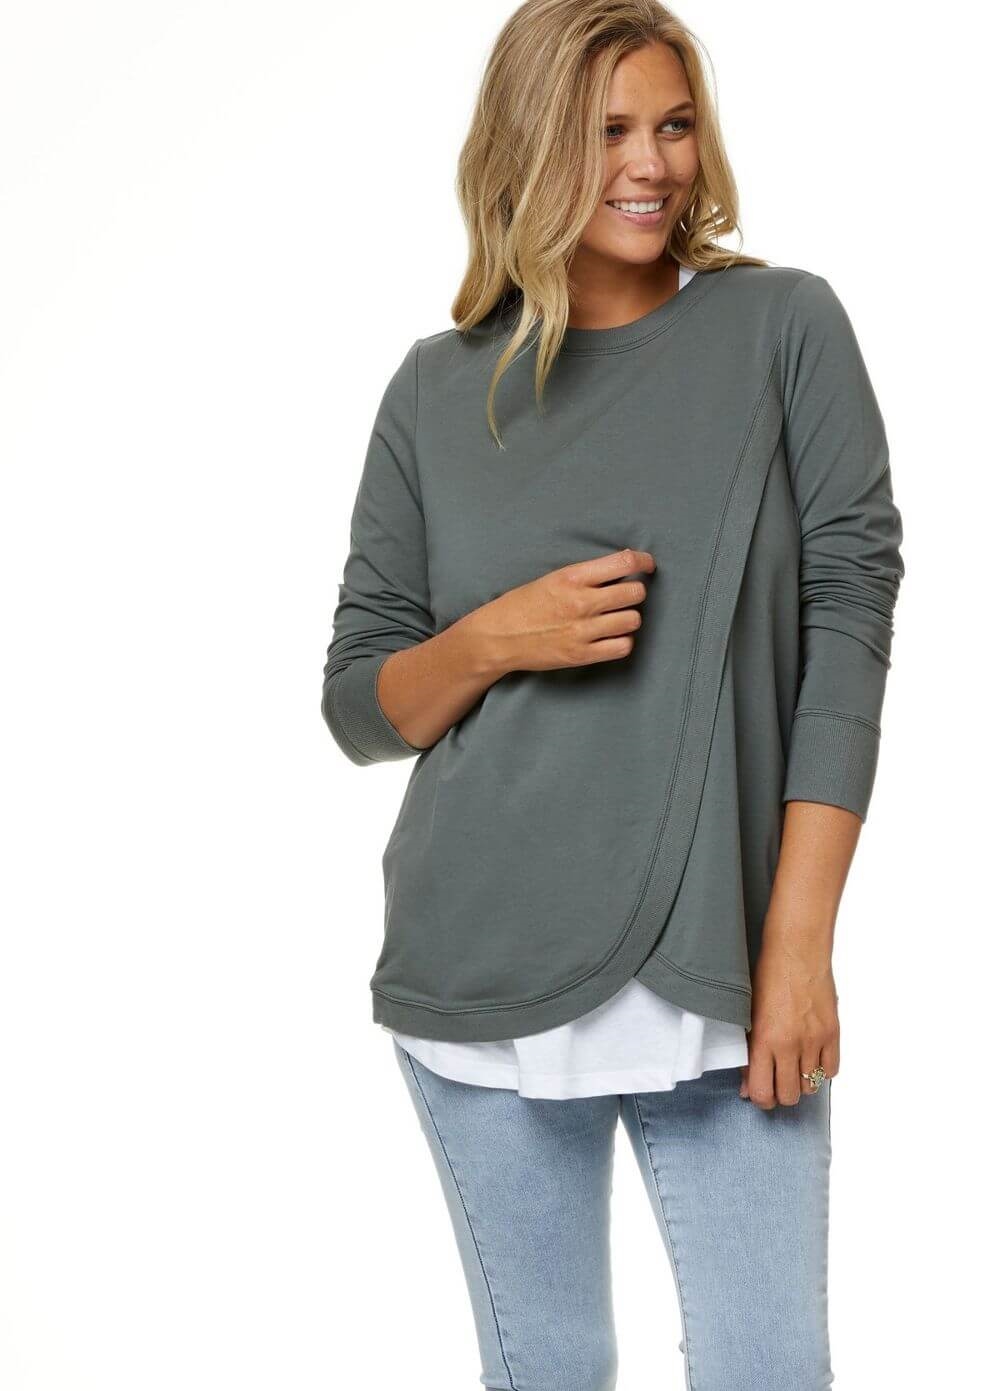 Bae - You Remind Me Maternity Nursing Sweater | Queen Bee